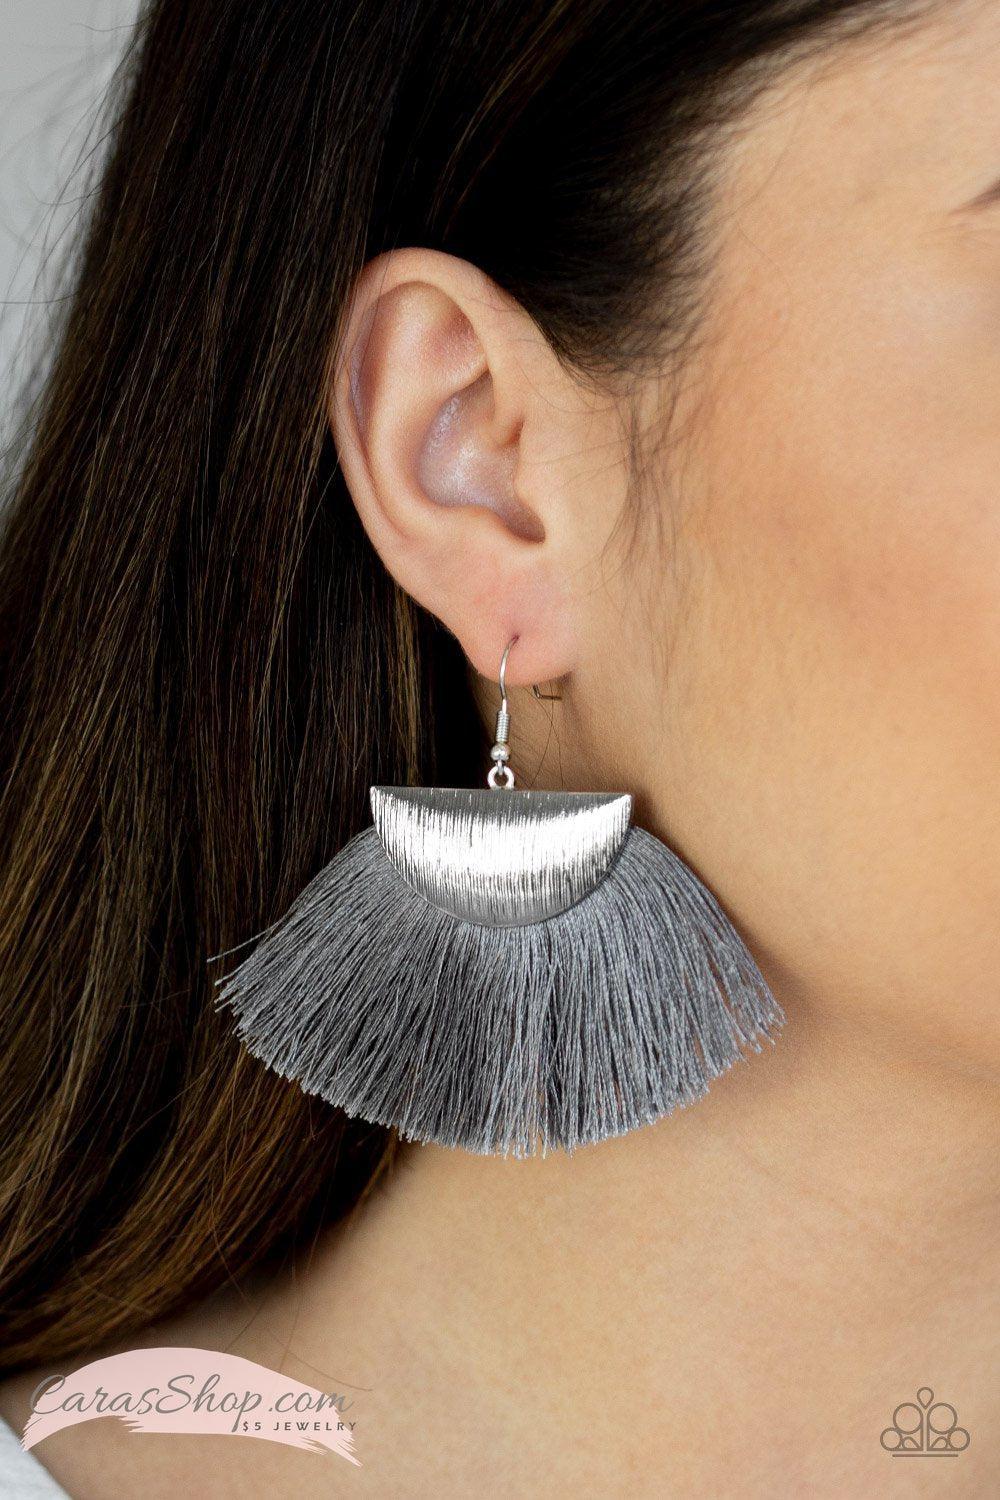 Fox Trap Silver Fringe Earrings - Paparazzi Accessories-CarasShop.com - $5 Jewelry by Cara Jewels